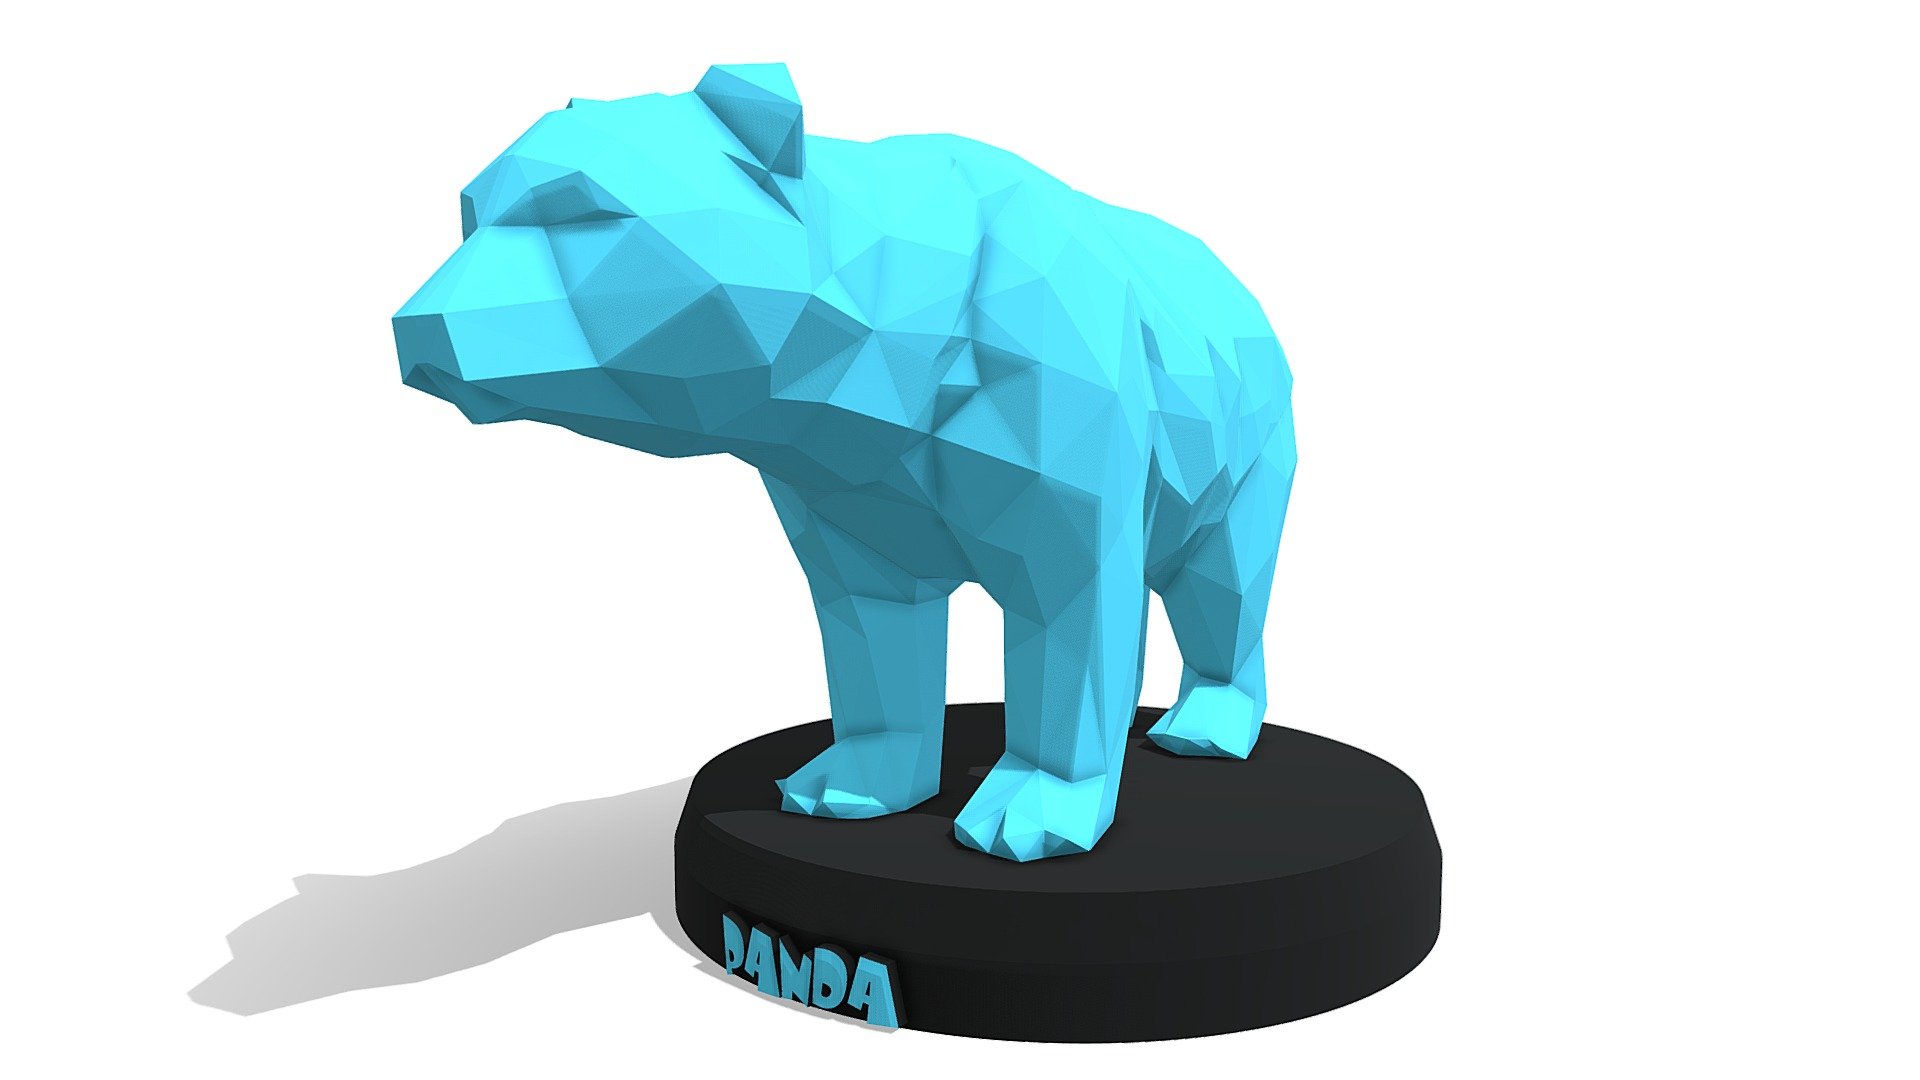 Polygonal 3D Model with Parametric modeling with gold material, make it recommend for :




Basic modeling 

Rigging 

sculpting 

Become Statue

Decorate

3D Print File

Toy

Have fun  :) - Poly Panda - Buy Royalty Free 3D model by Puppy3D 3d model